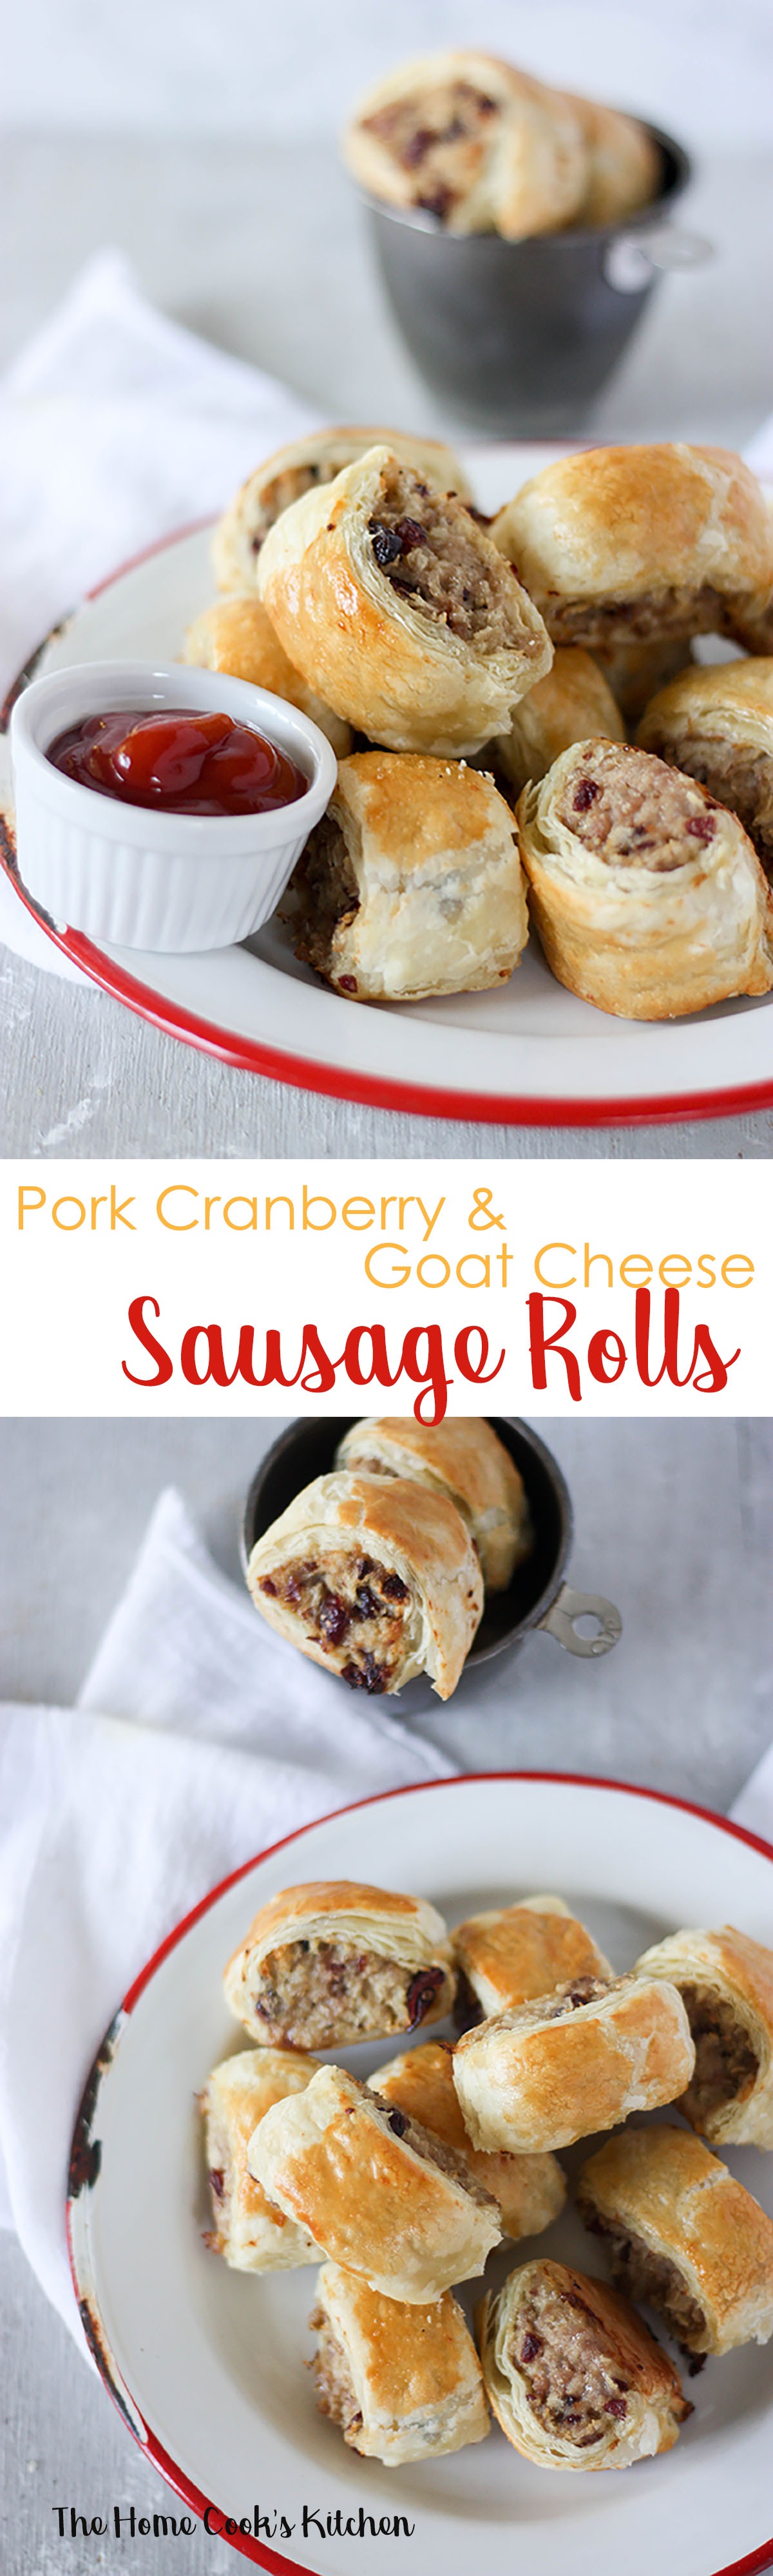 These pork cranberry & goat cheese sausage rolls are great for a quick fuss free party food www.thehomecookskitchen.com